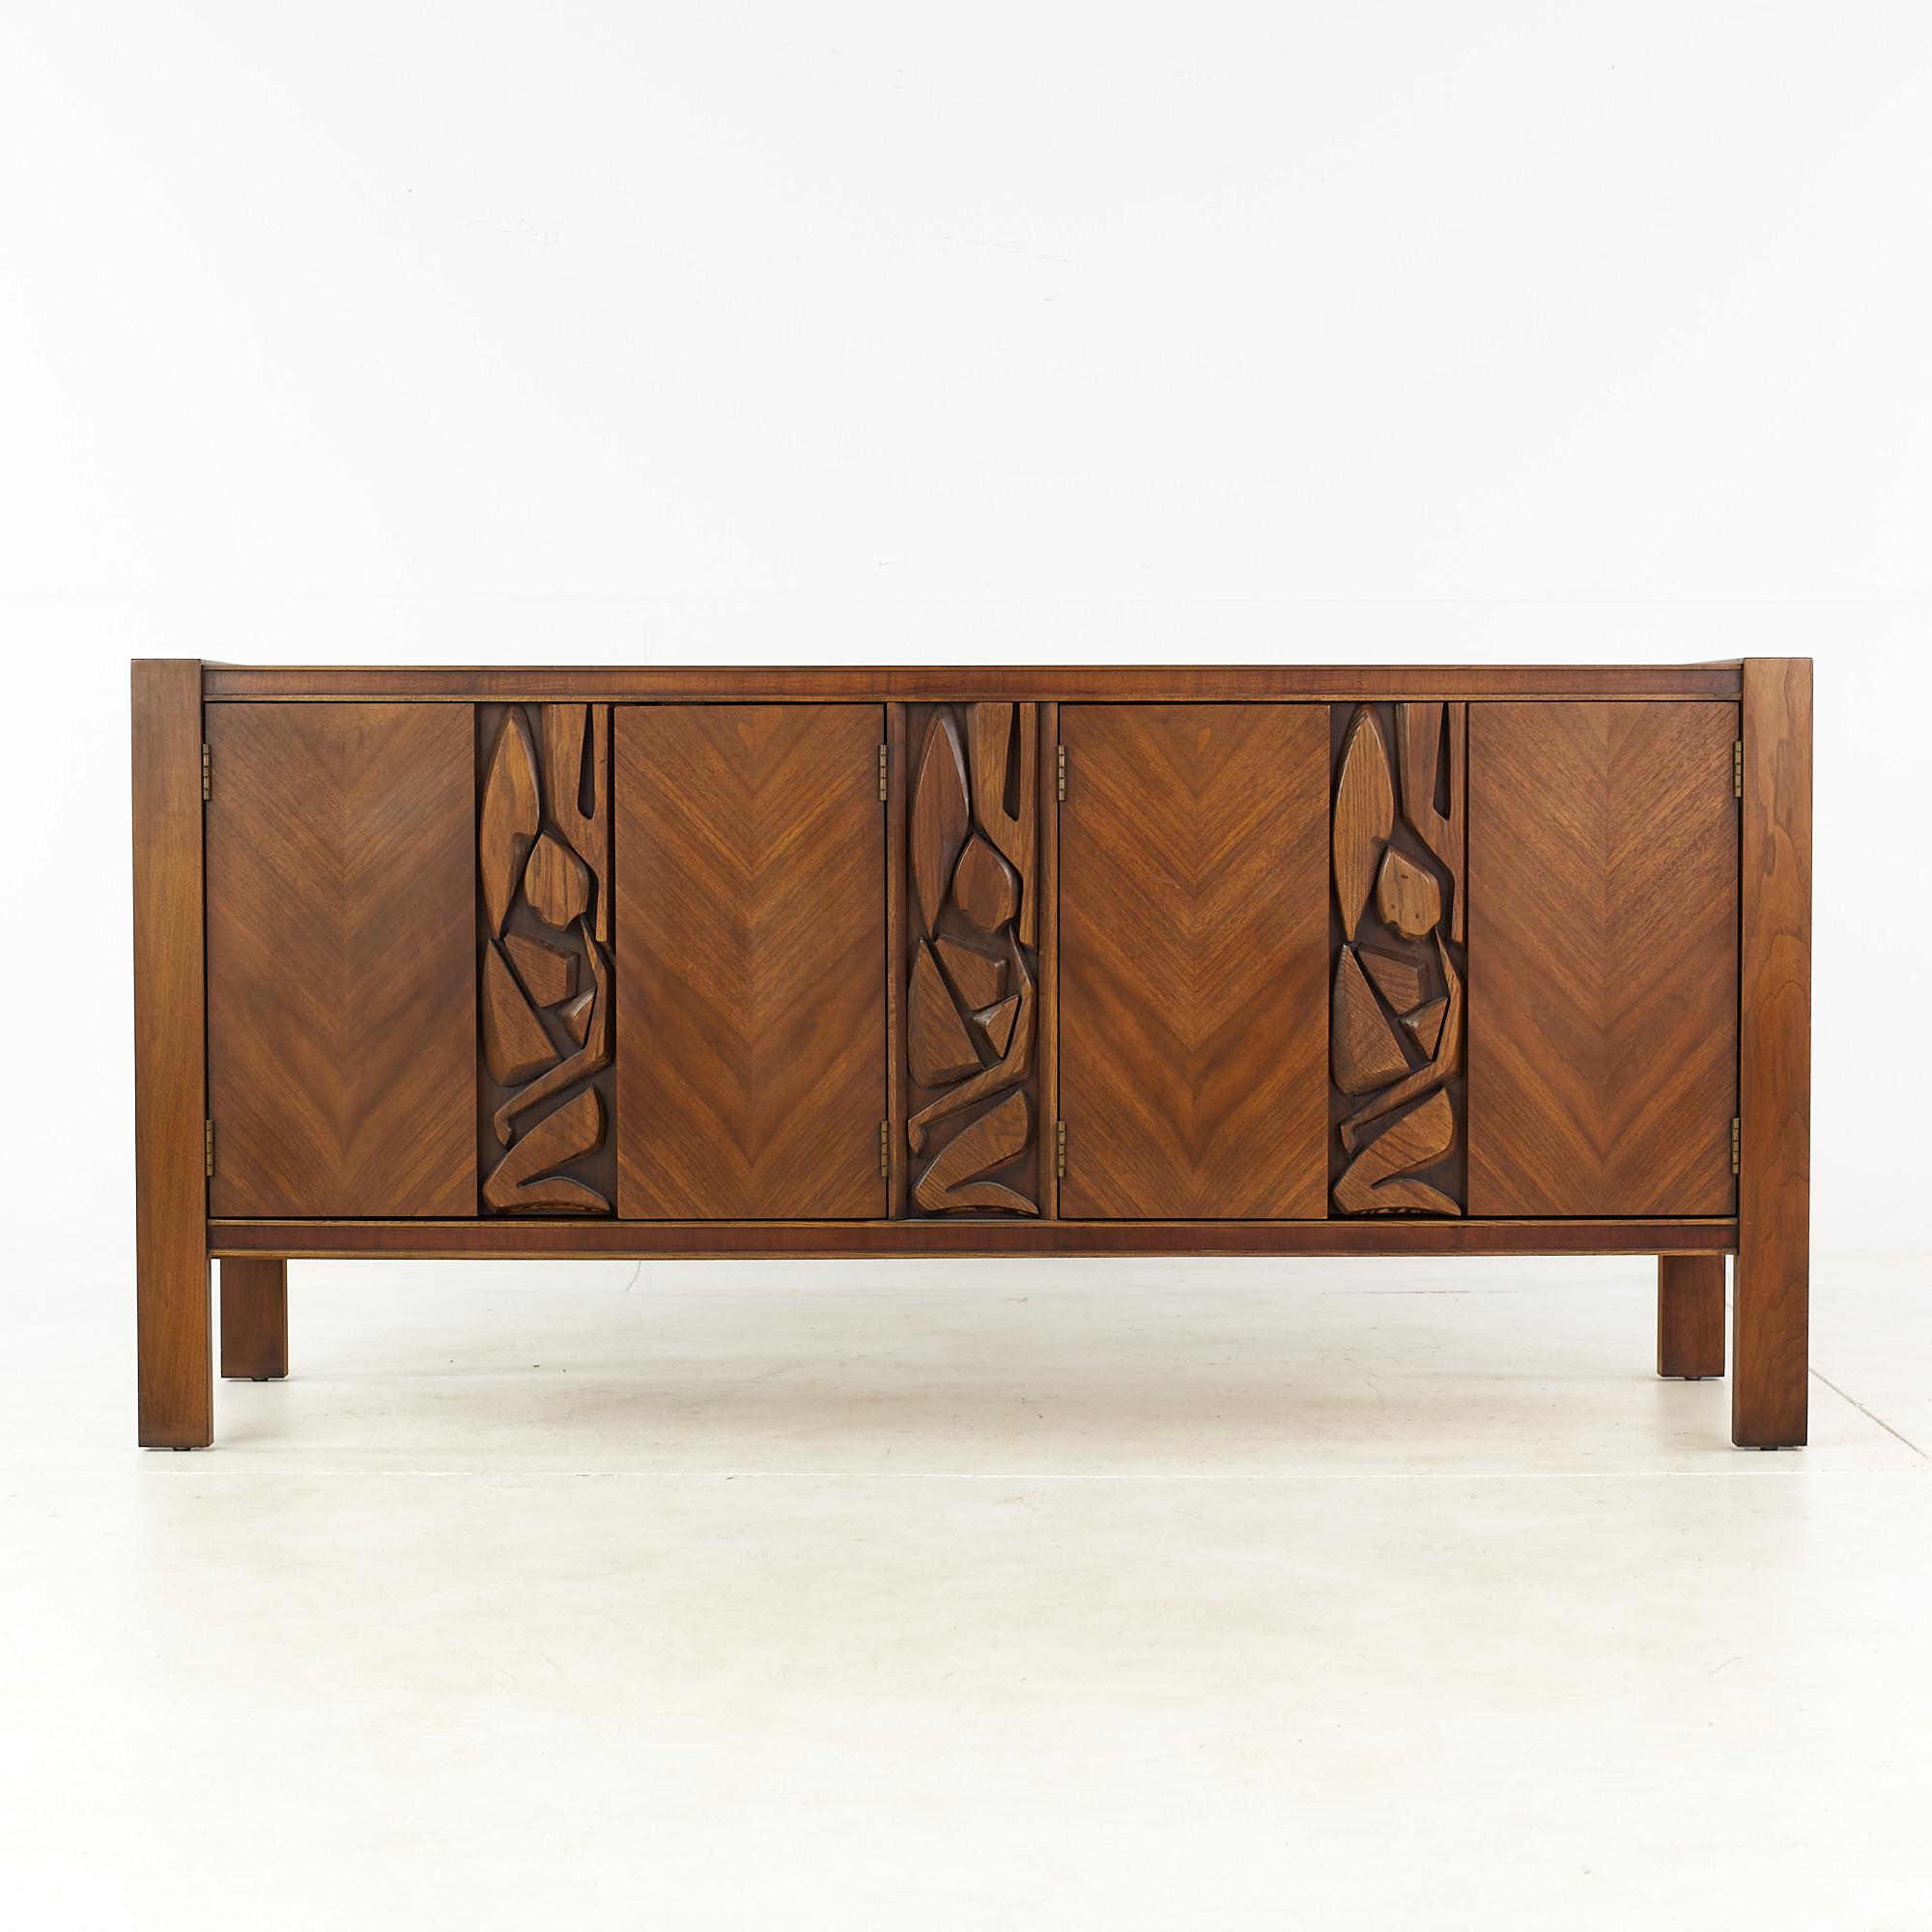 United Mid Century Tiki Brutalist walnut sideboard buffet credenza

This credenza measures: 69 wide x 20 deep x 32.5 inches high

All pieces of furniture can be had in what we call restored vintage condition. That means the piece is restored